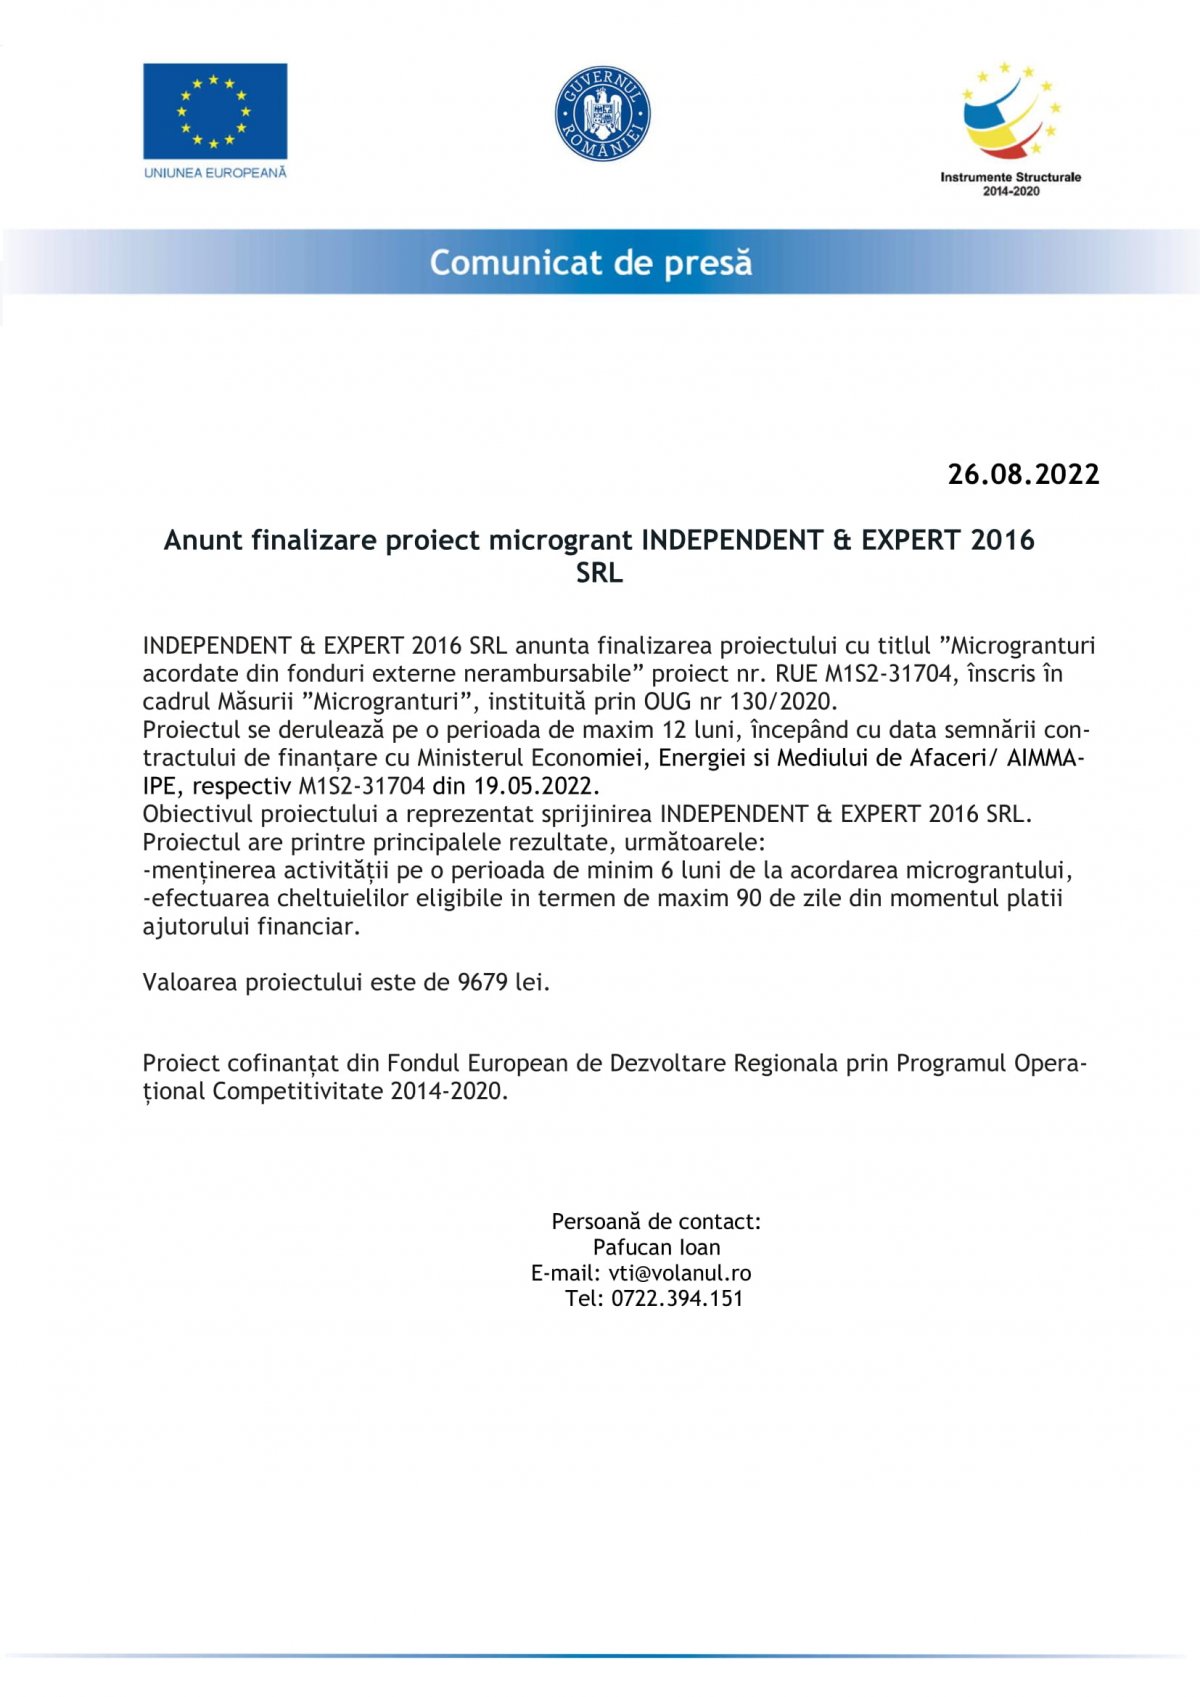 Anunt finalizare proiect microgrant INDEPENDENT & EXPERT 2016 SRL